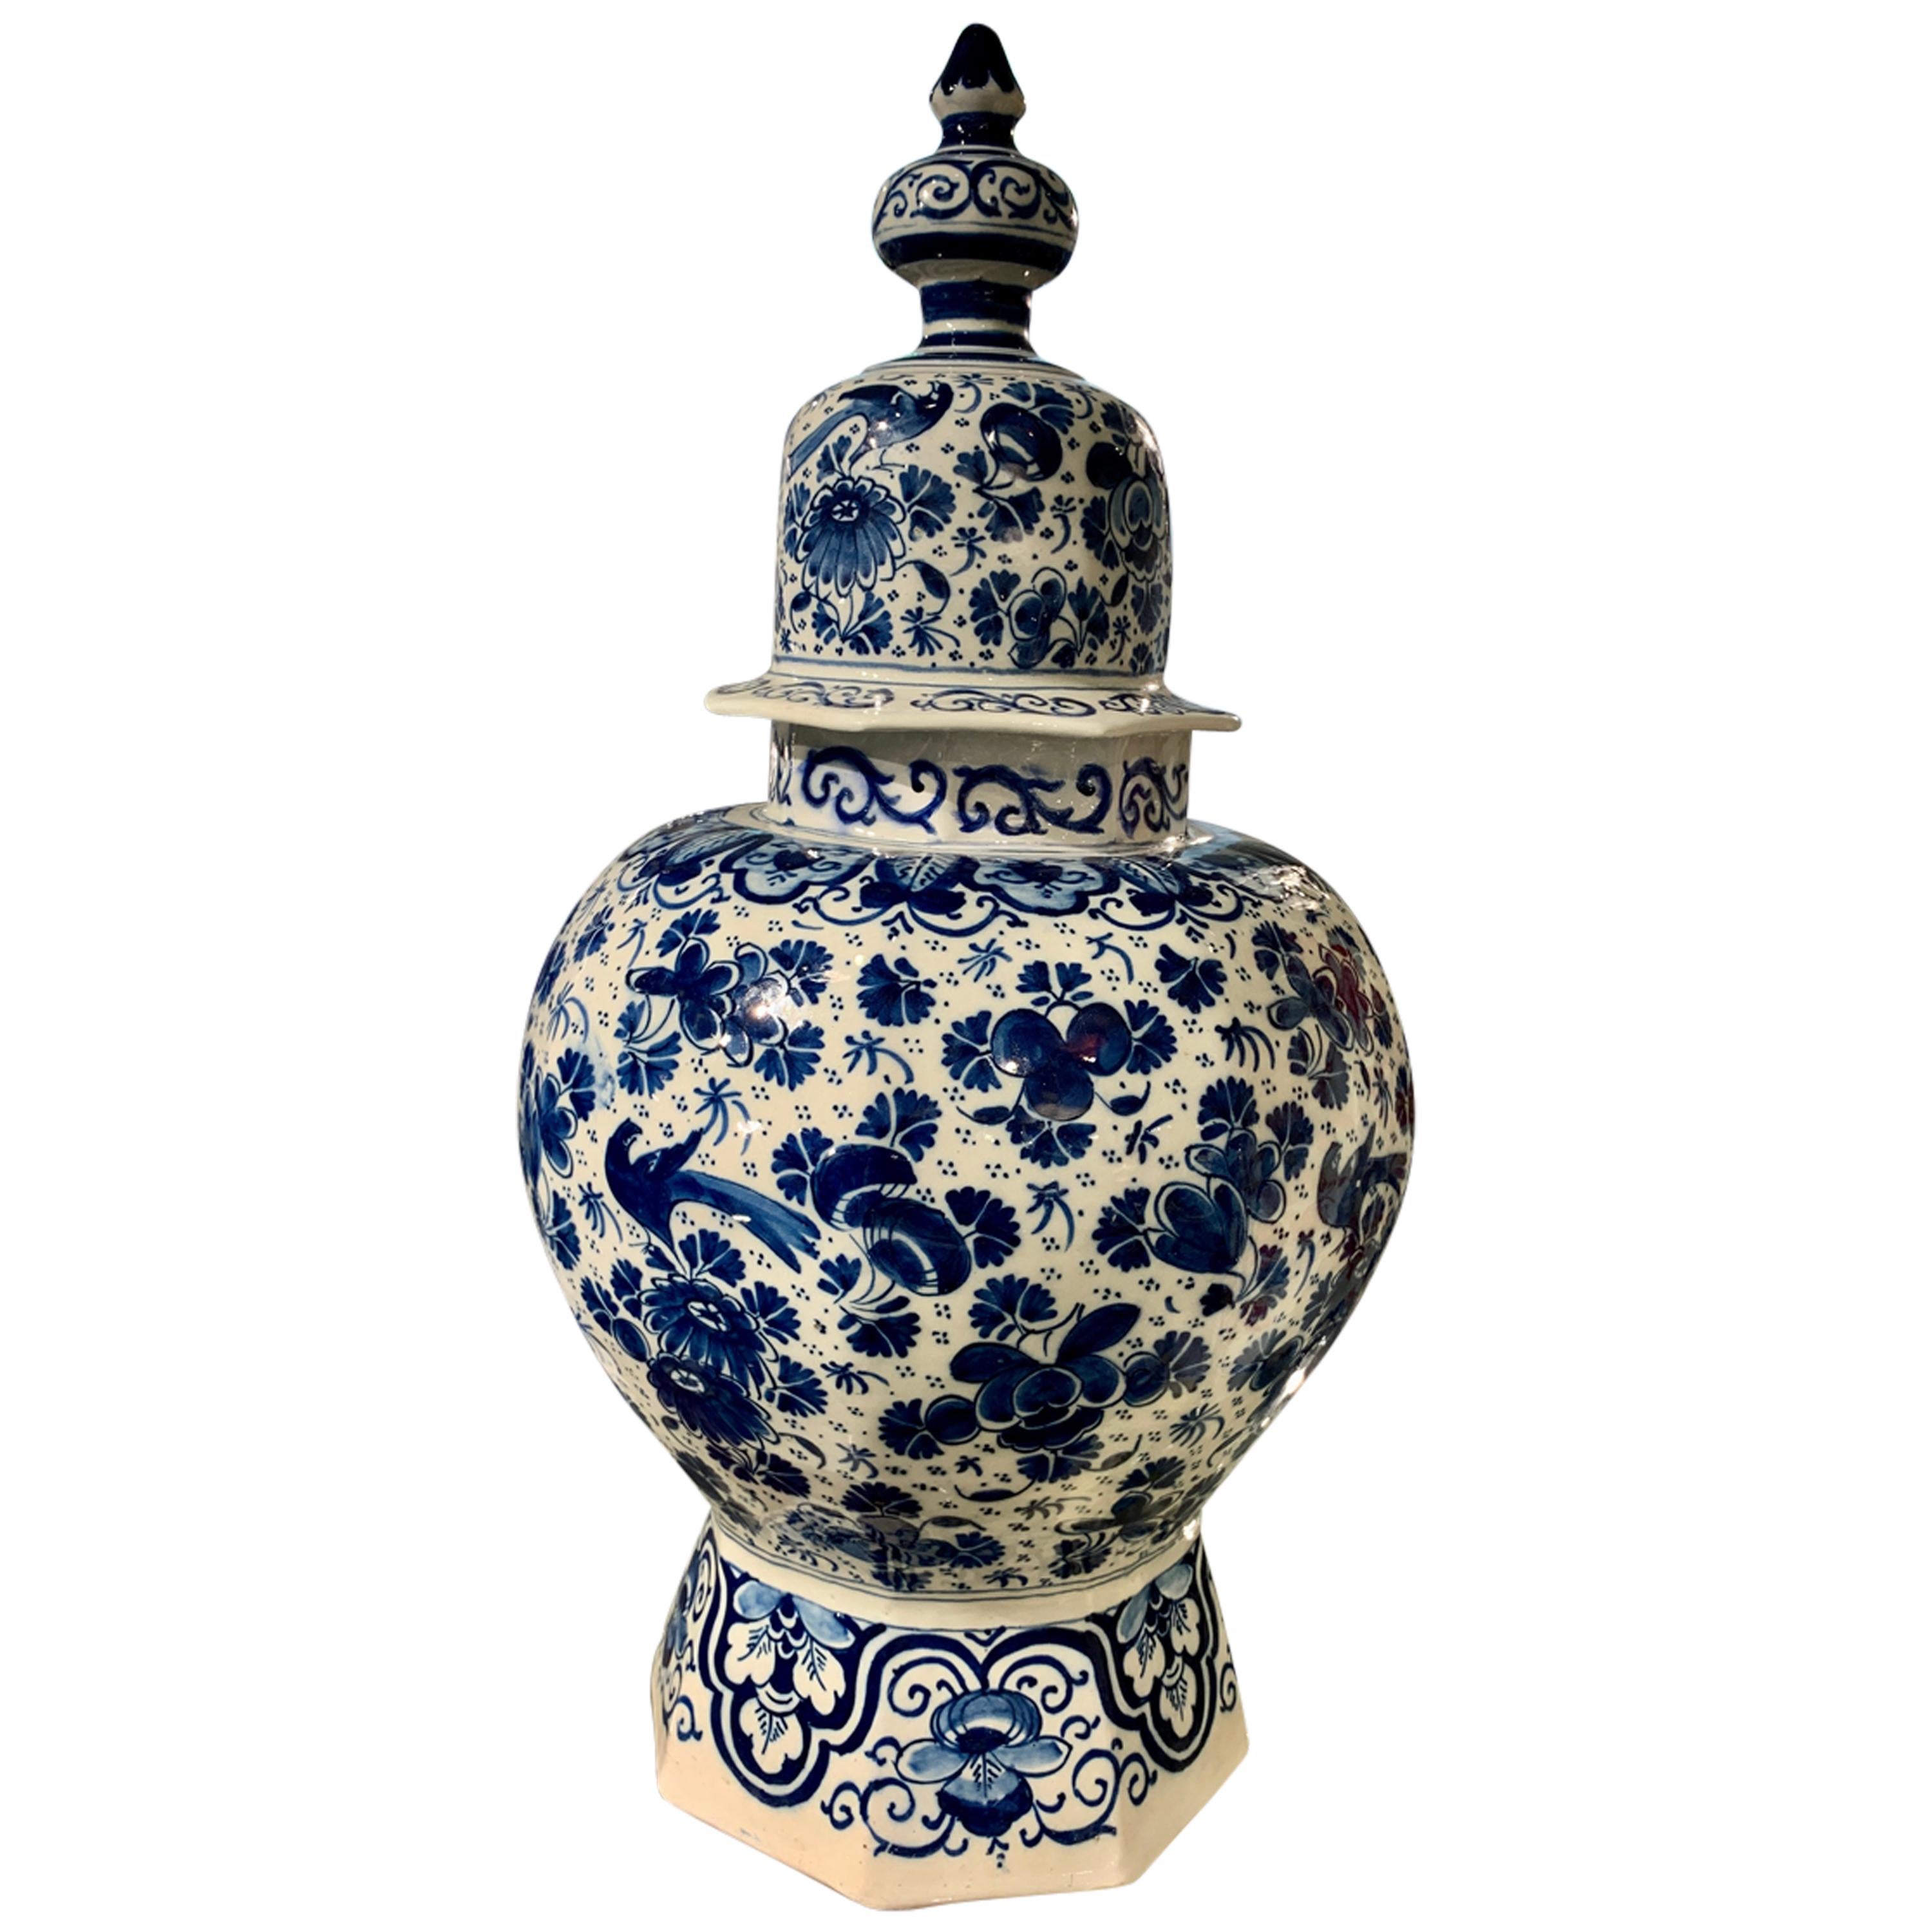 Antique Blue and White Delft Covered Jar Made Netherlands, 1700-1716